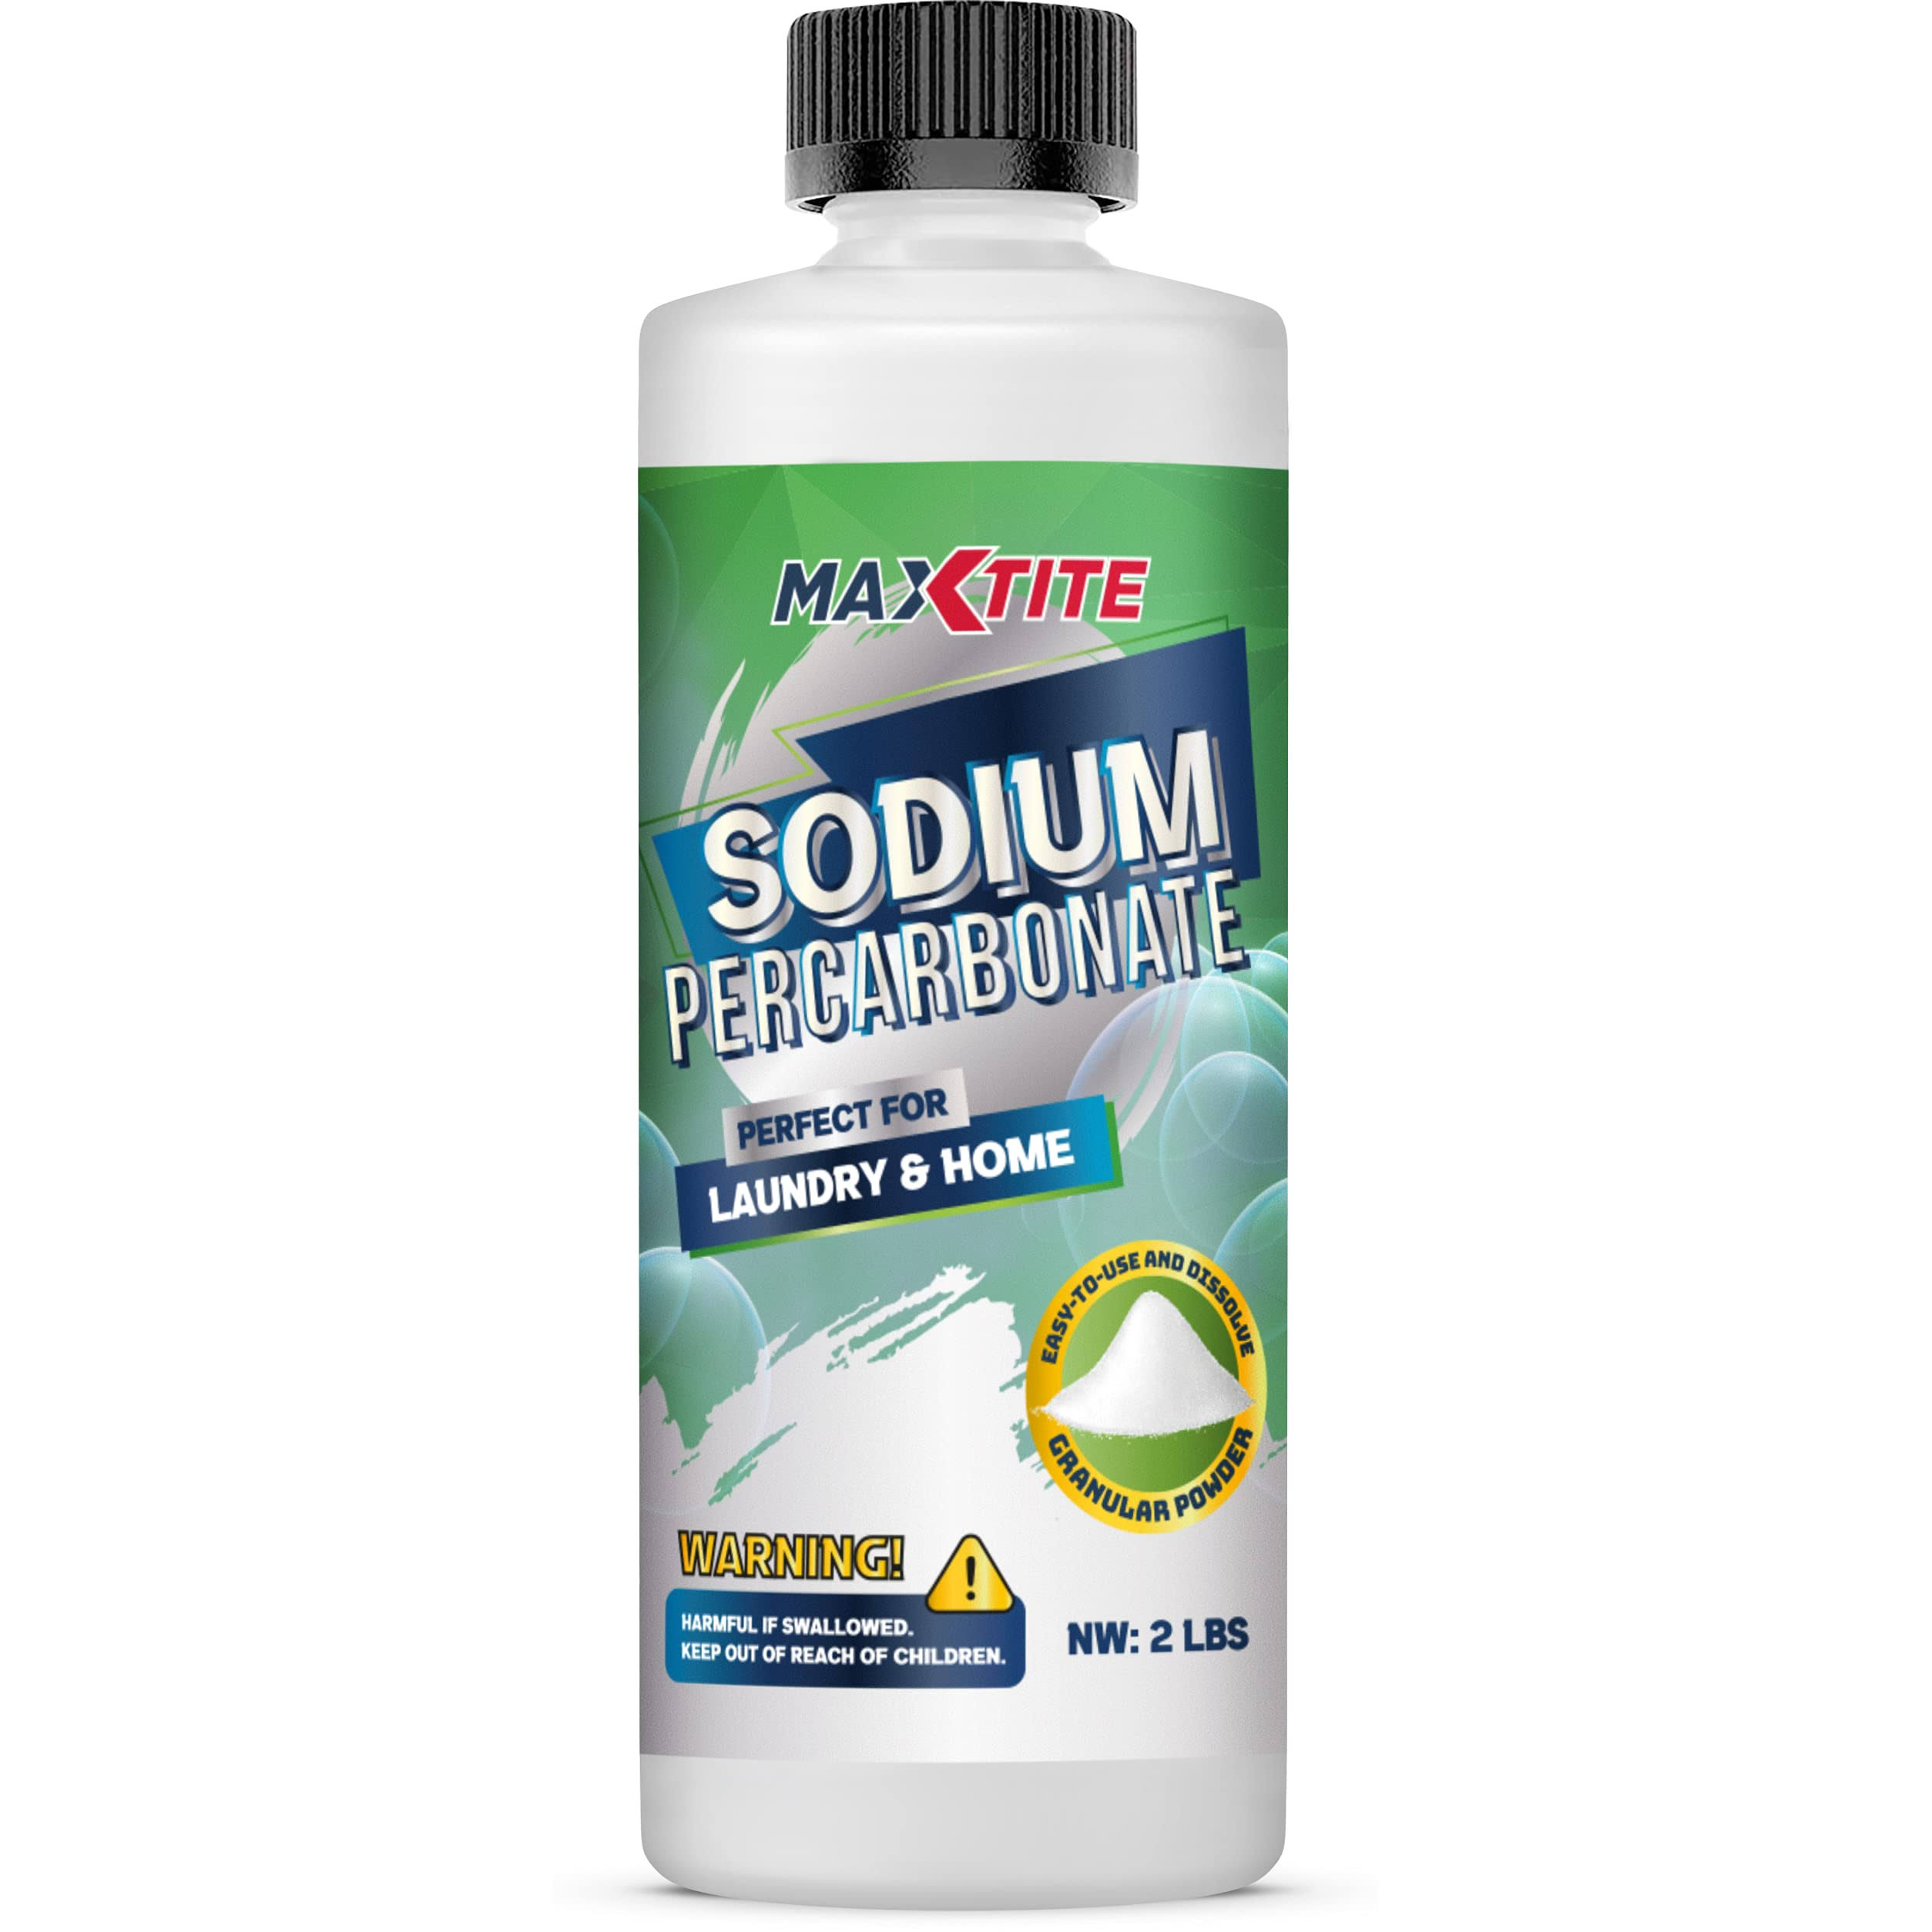 Sodium Percarbonate (2 lbs) - 100% Pure - Solid Hydrogen Peroxide/Oxygenated Bleach - Multi-Use Cleaner for Home & Laundry - HDPE Container W